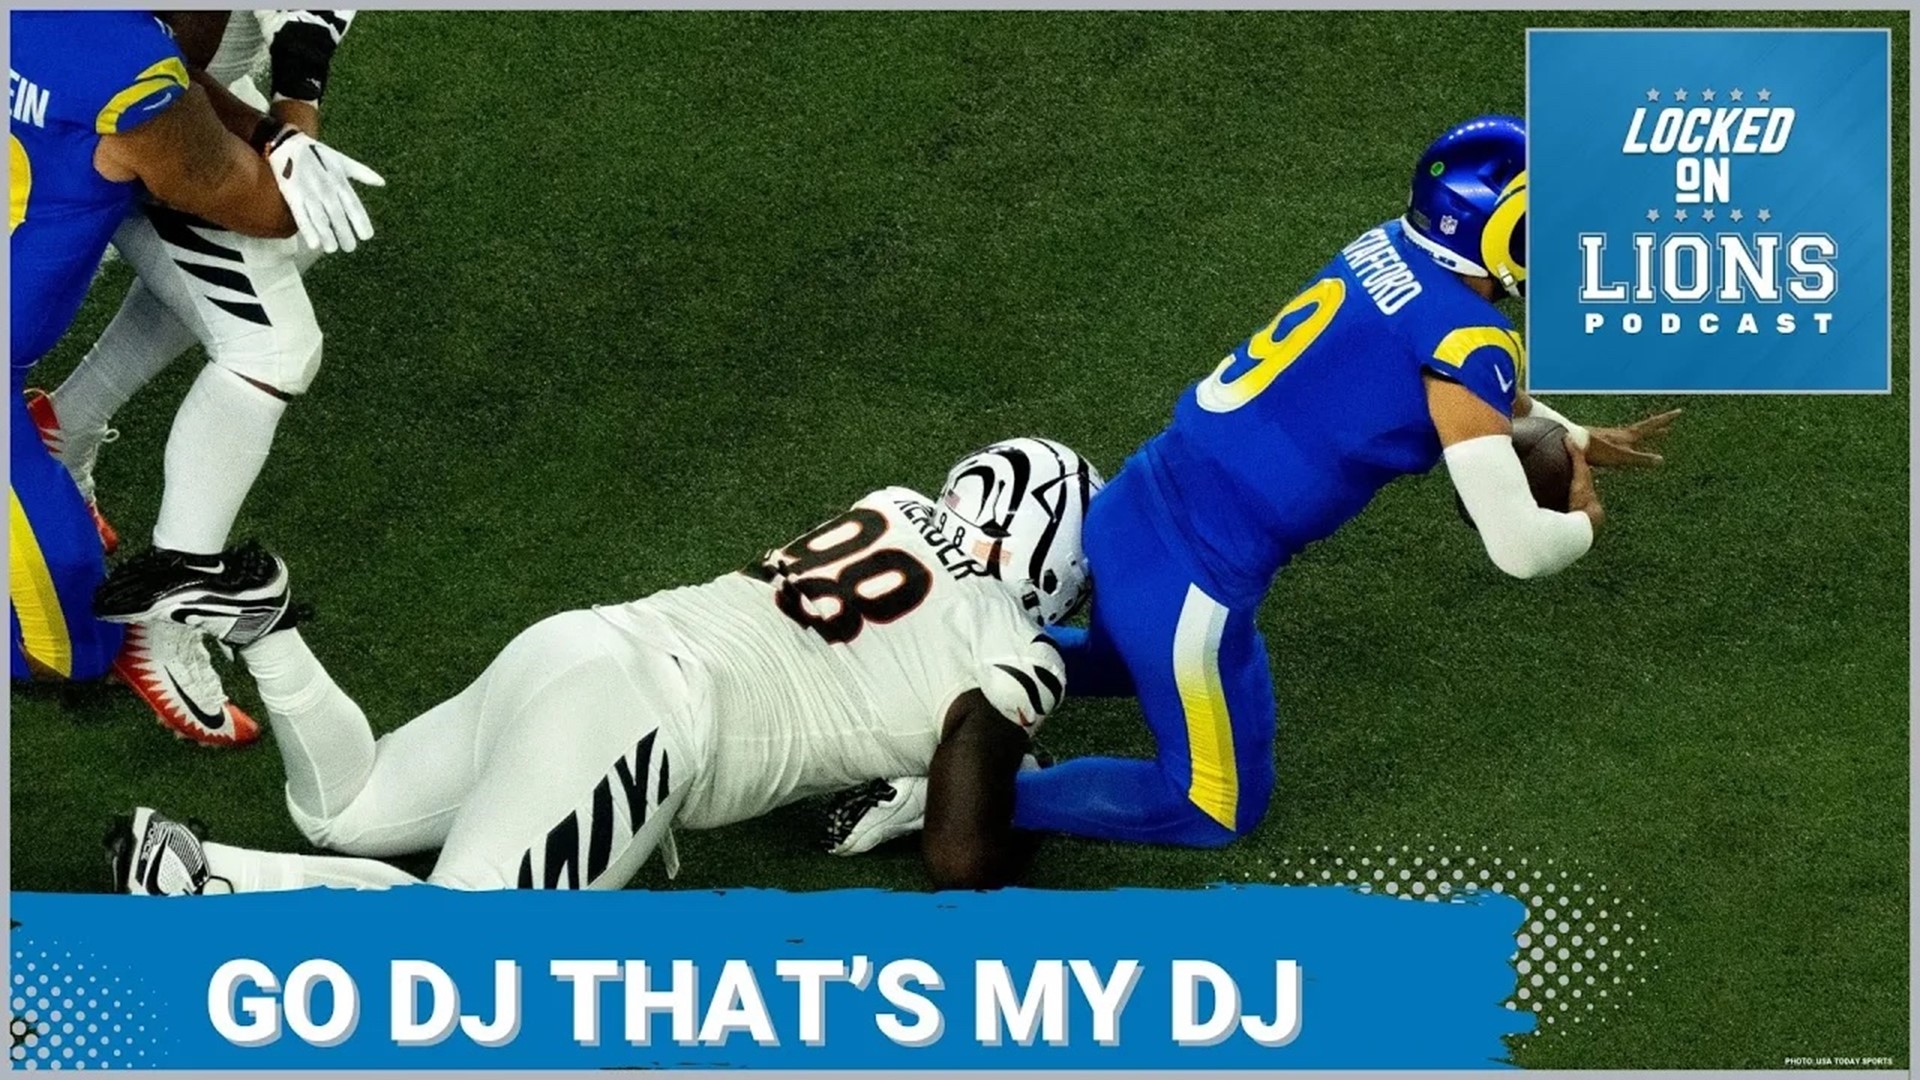 DJ Reader is now a Detroit Lion. The Free Agent DT has reportedly signed a 2 year 26.5 million dollar deal to come here.